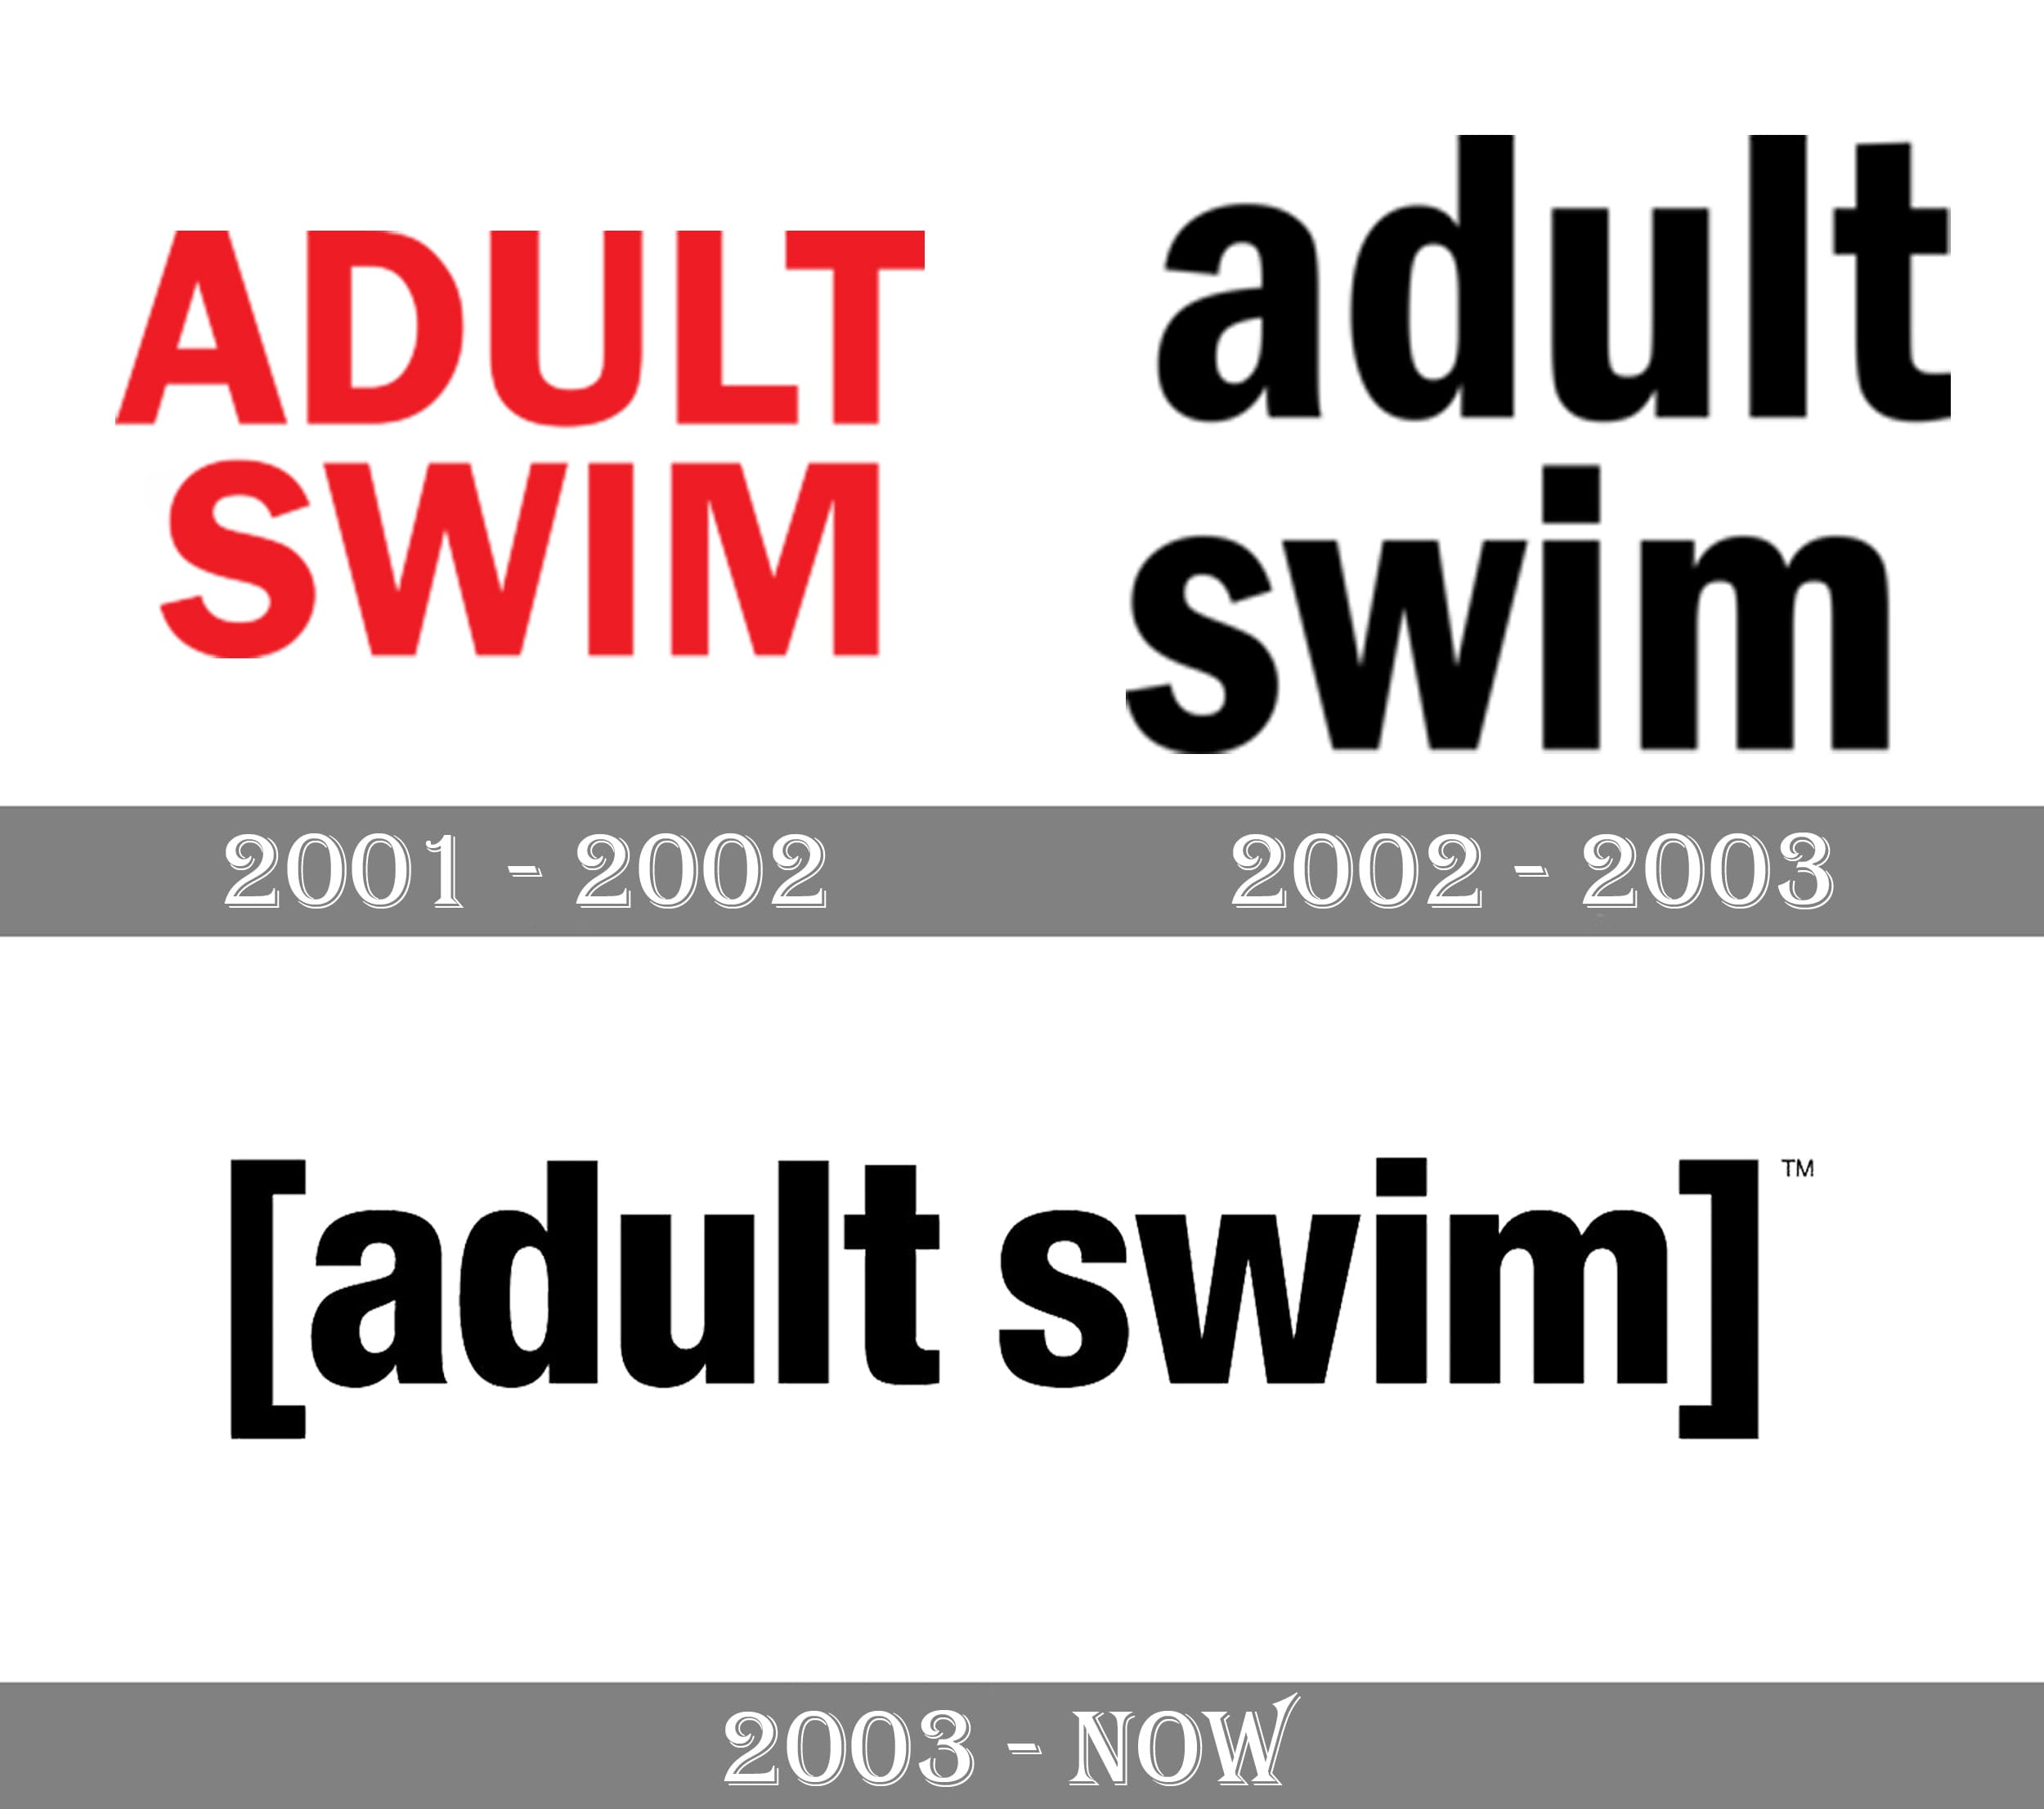 Swim meaning adult What is